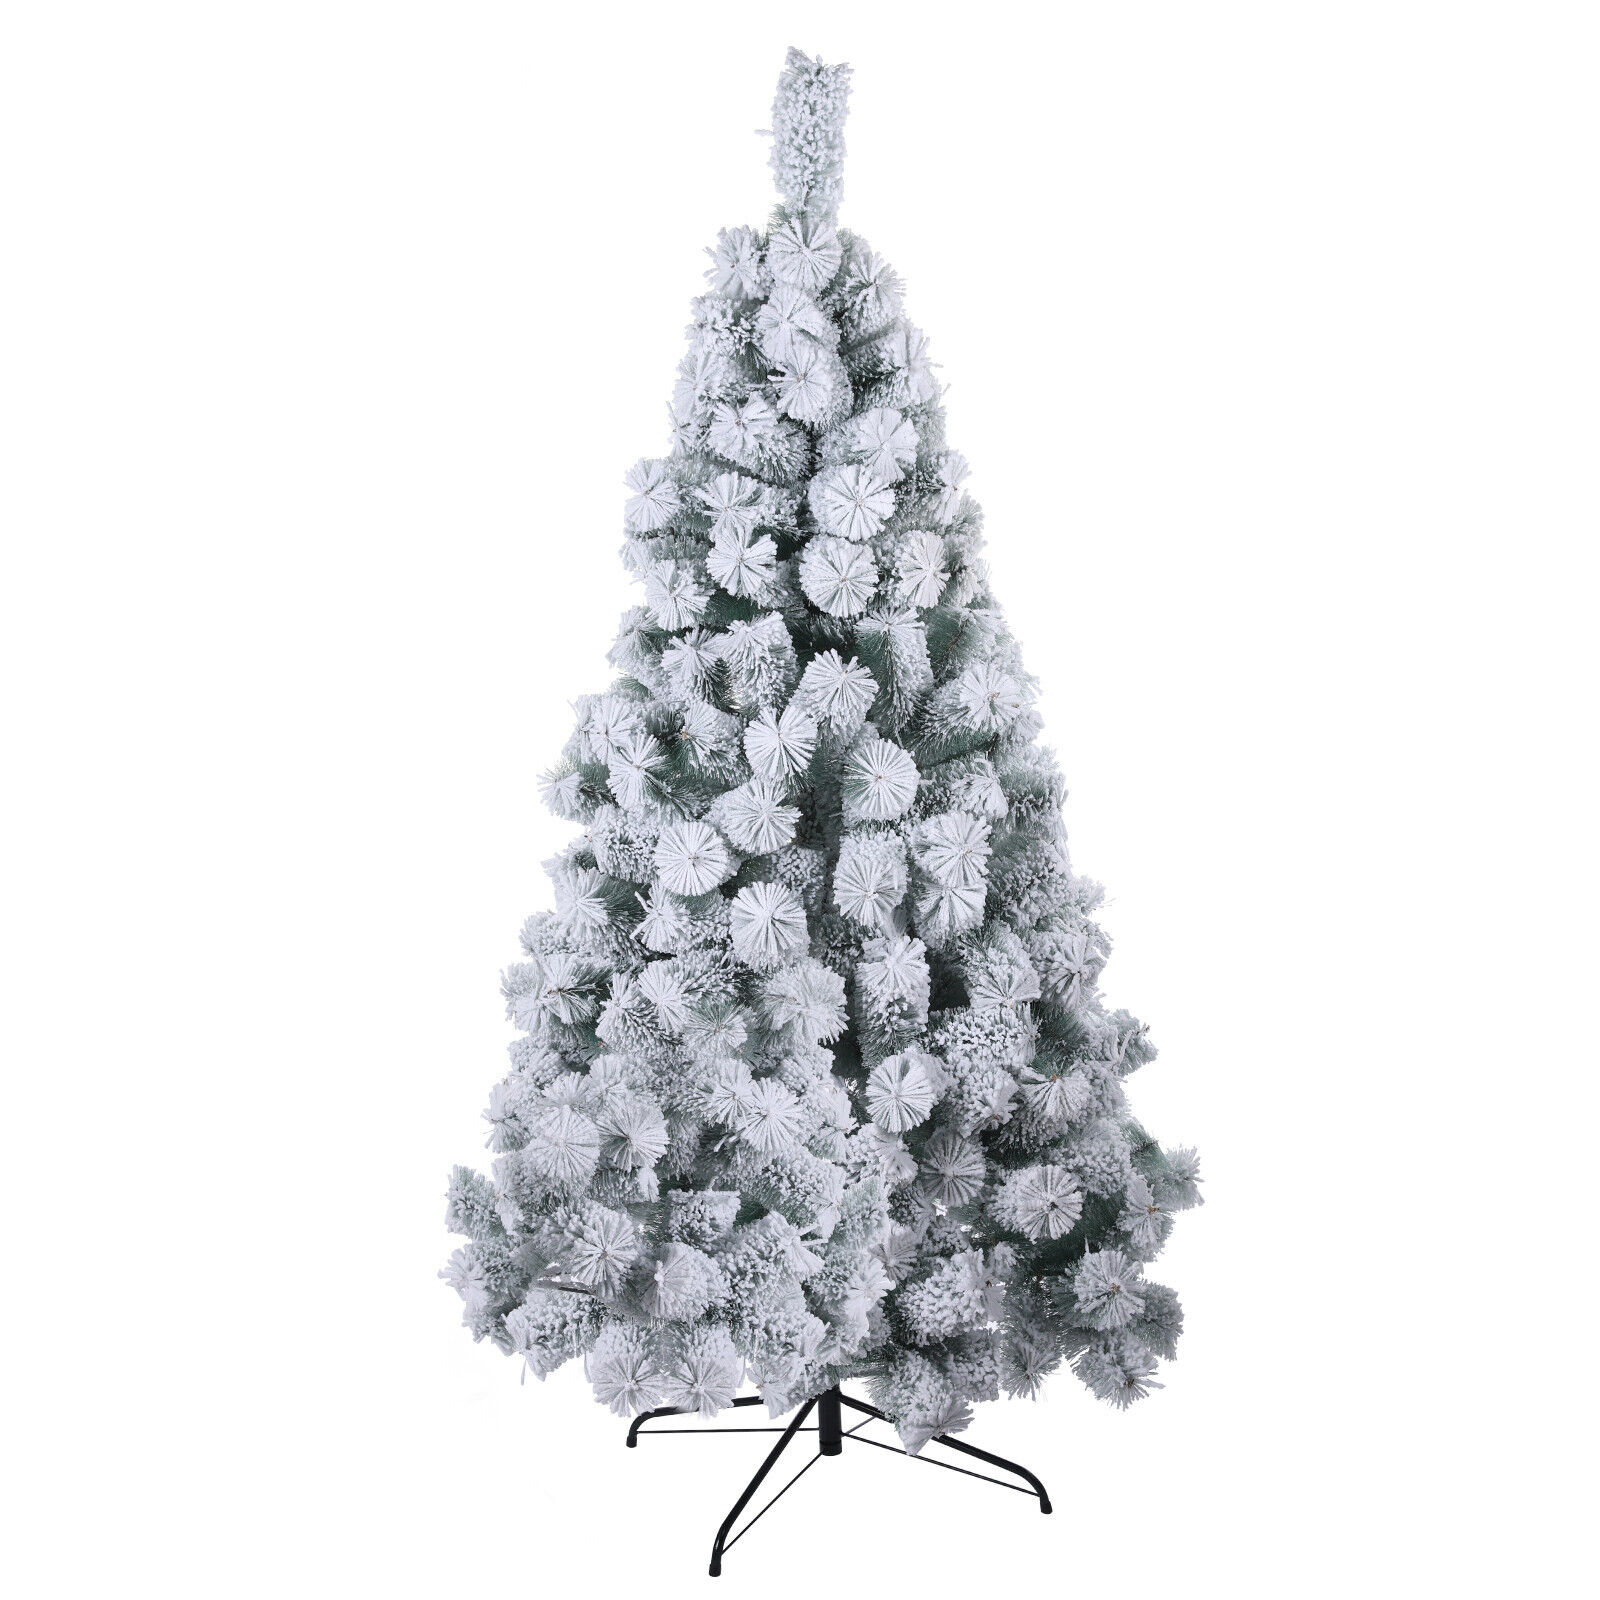 Artificial Christmas Tree White Snow Covered Xmas Decorations Decor With Stand